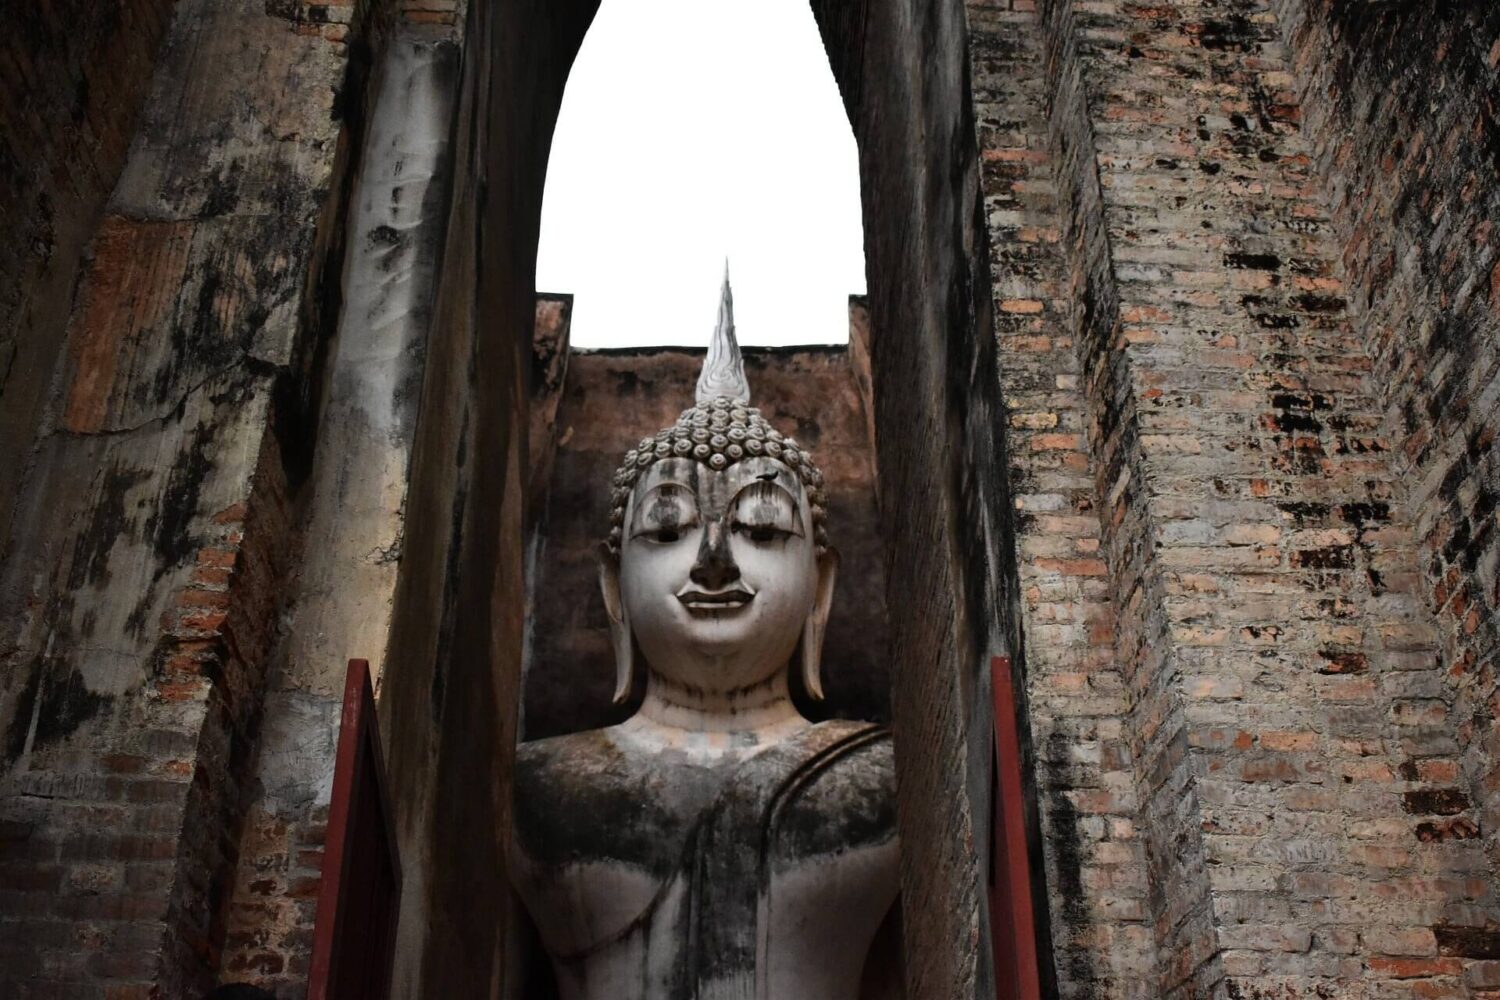 Phra Achana Buddha image in Wat si Chum temple, North zone of the Sukhothai Historical Park, another of the musts in your things to do in Sukhothai